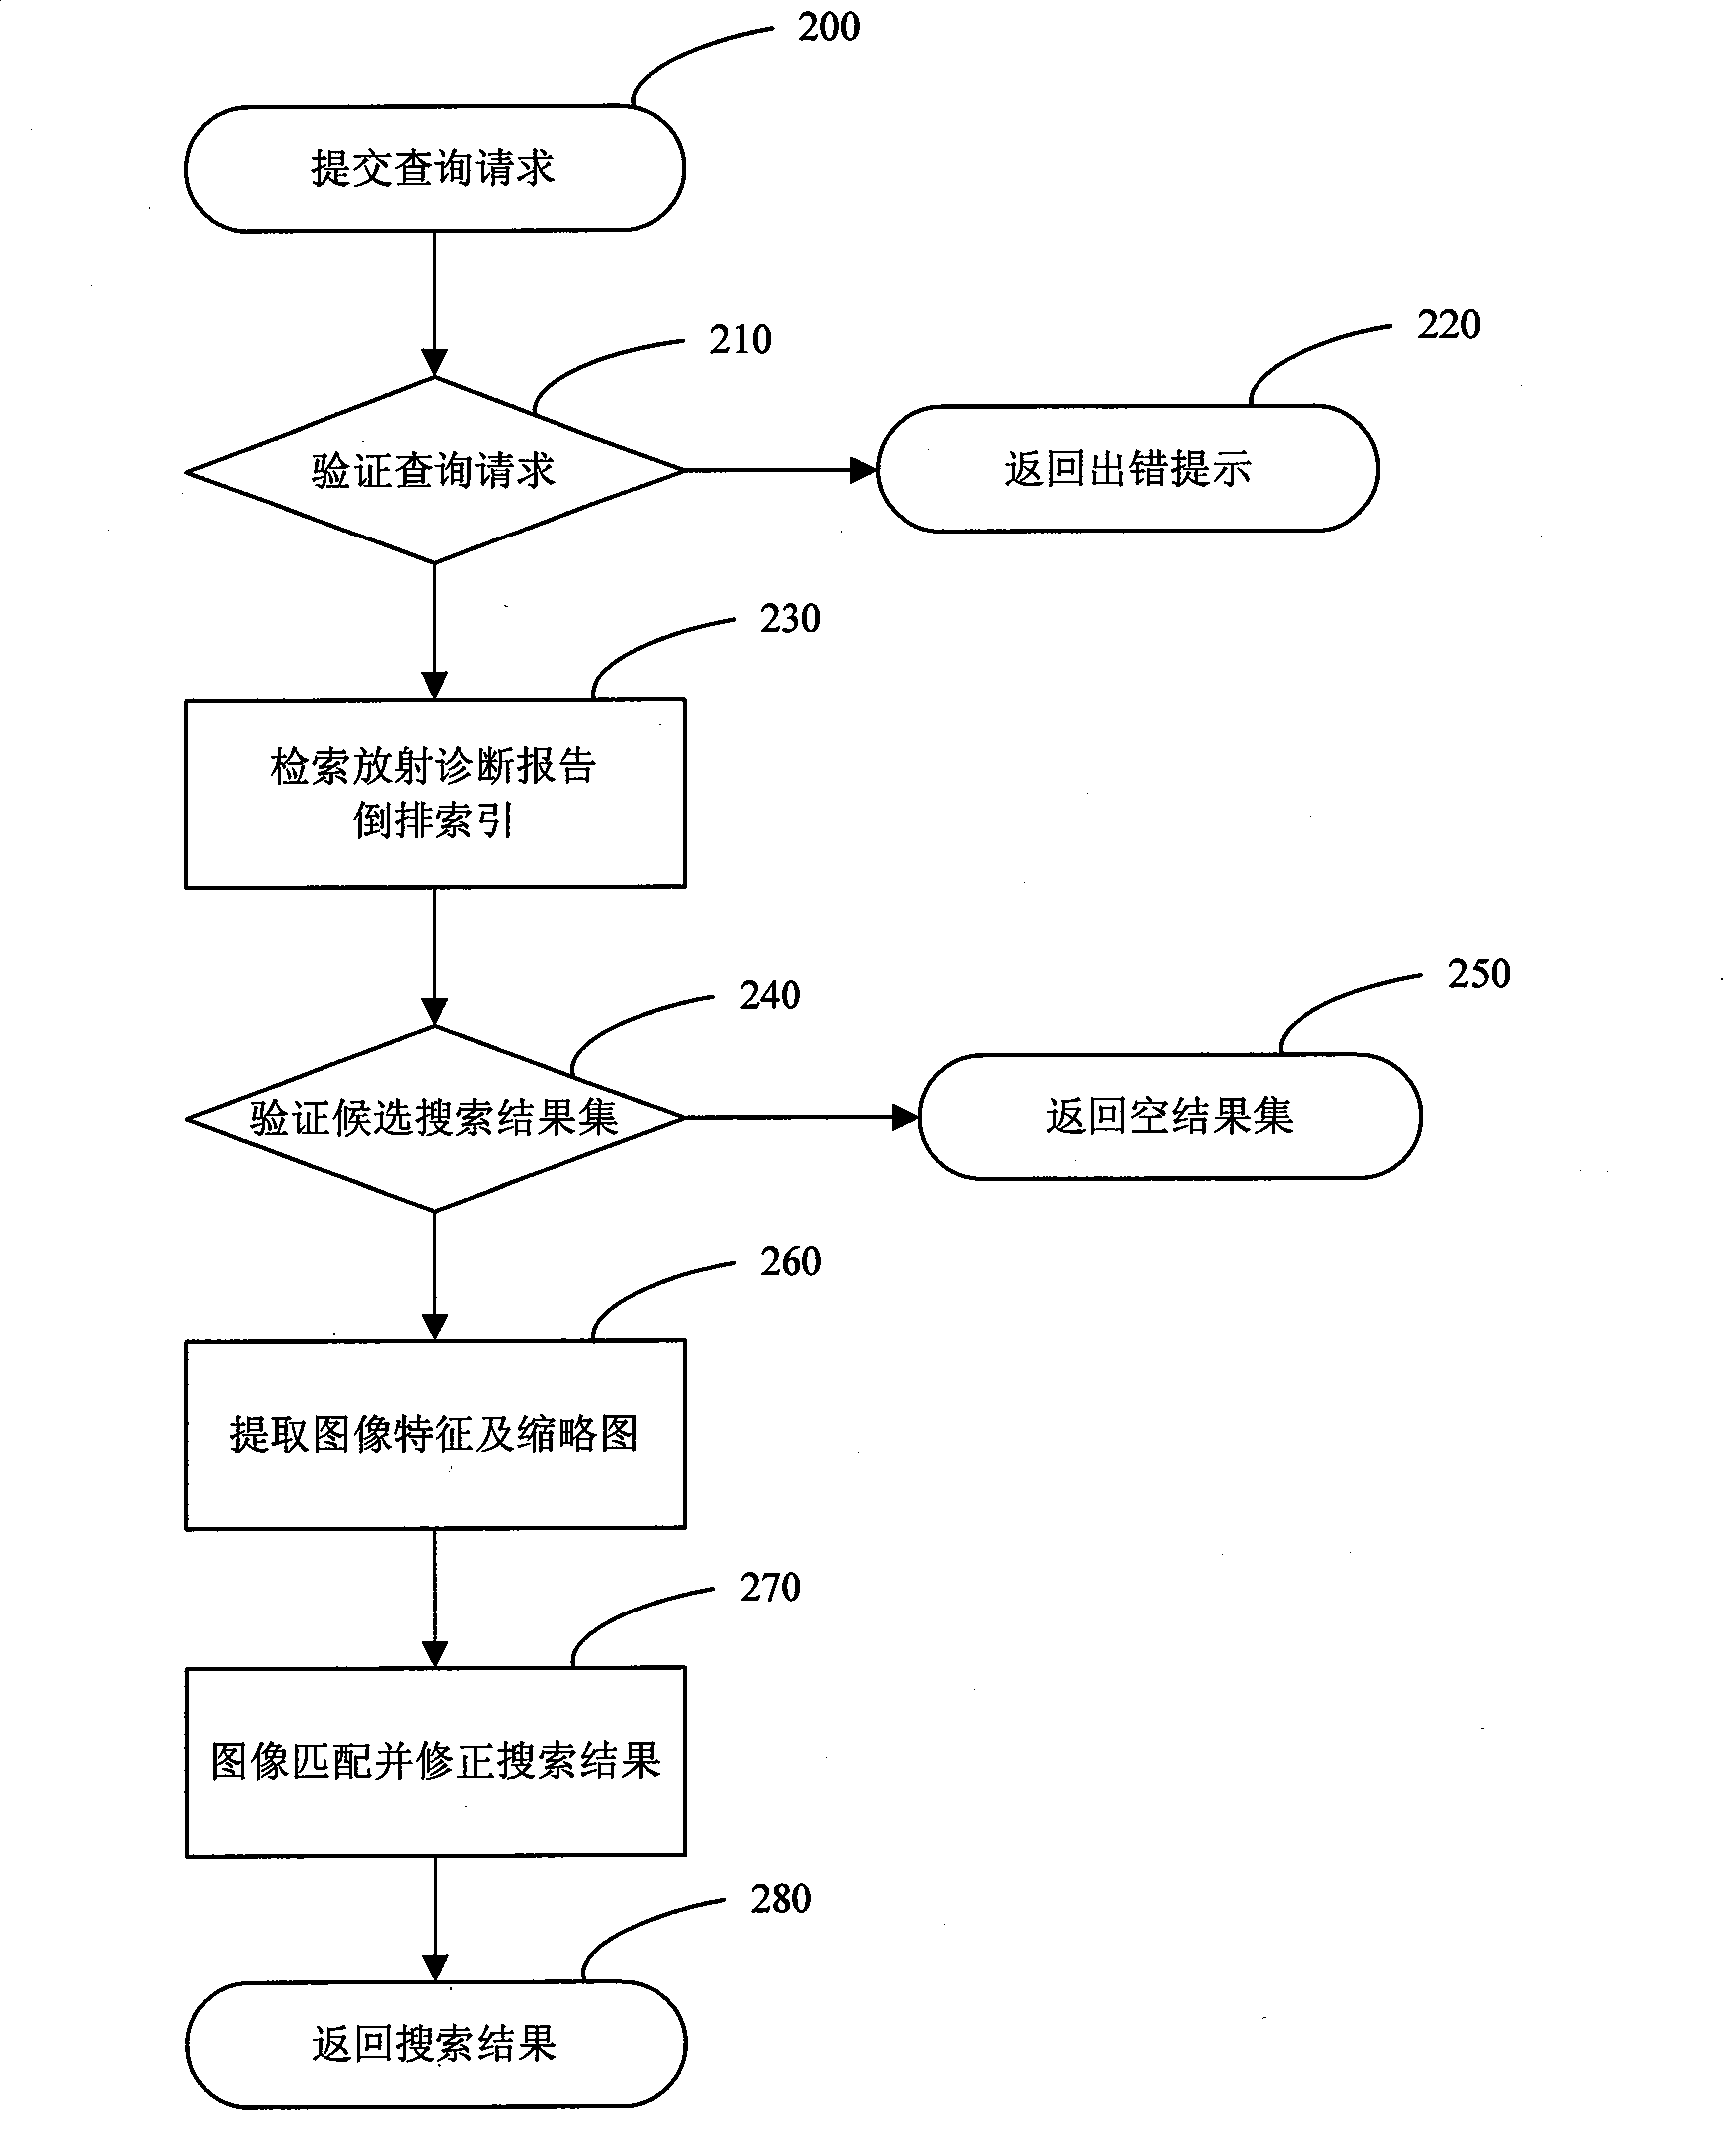 Search method and system facing to radiation image in PACS database based on content